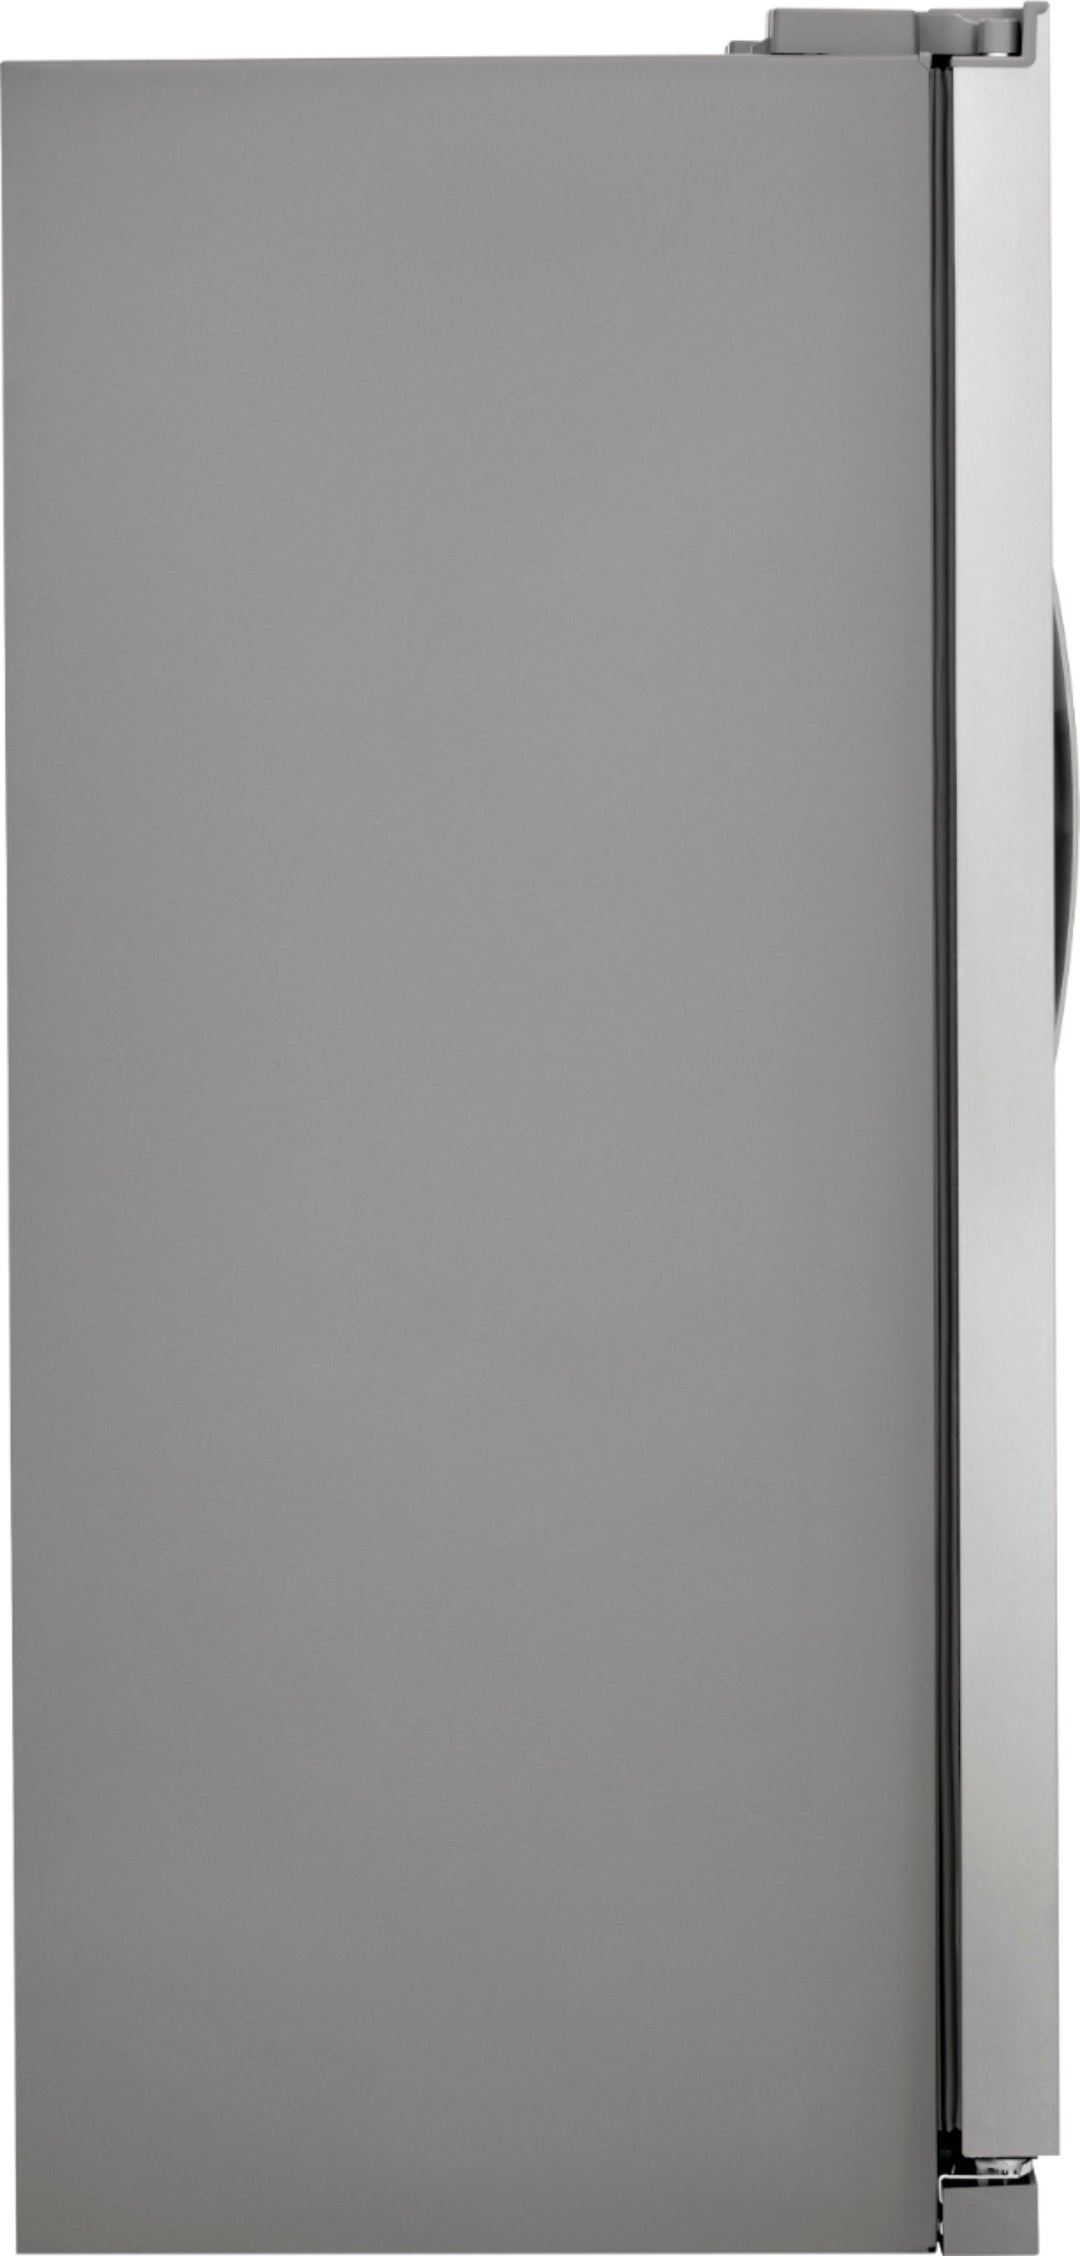 Frigidaire - 22.3 Cu. Ft. Side-by-Side Refrigerator - Stainless steel_11